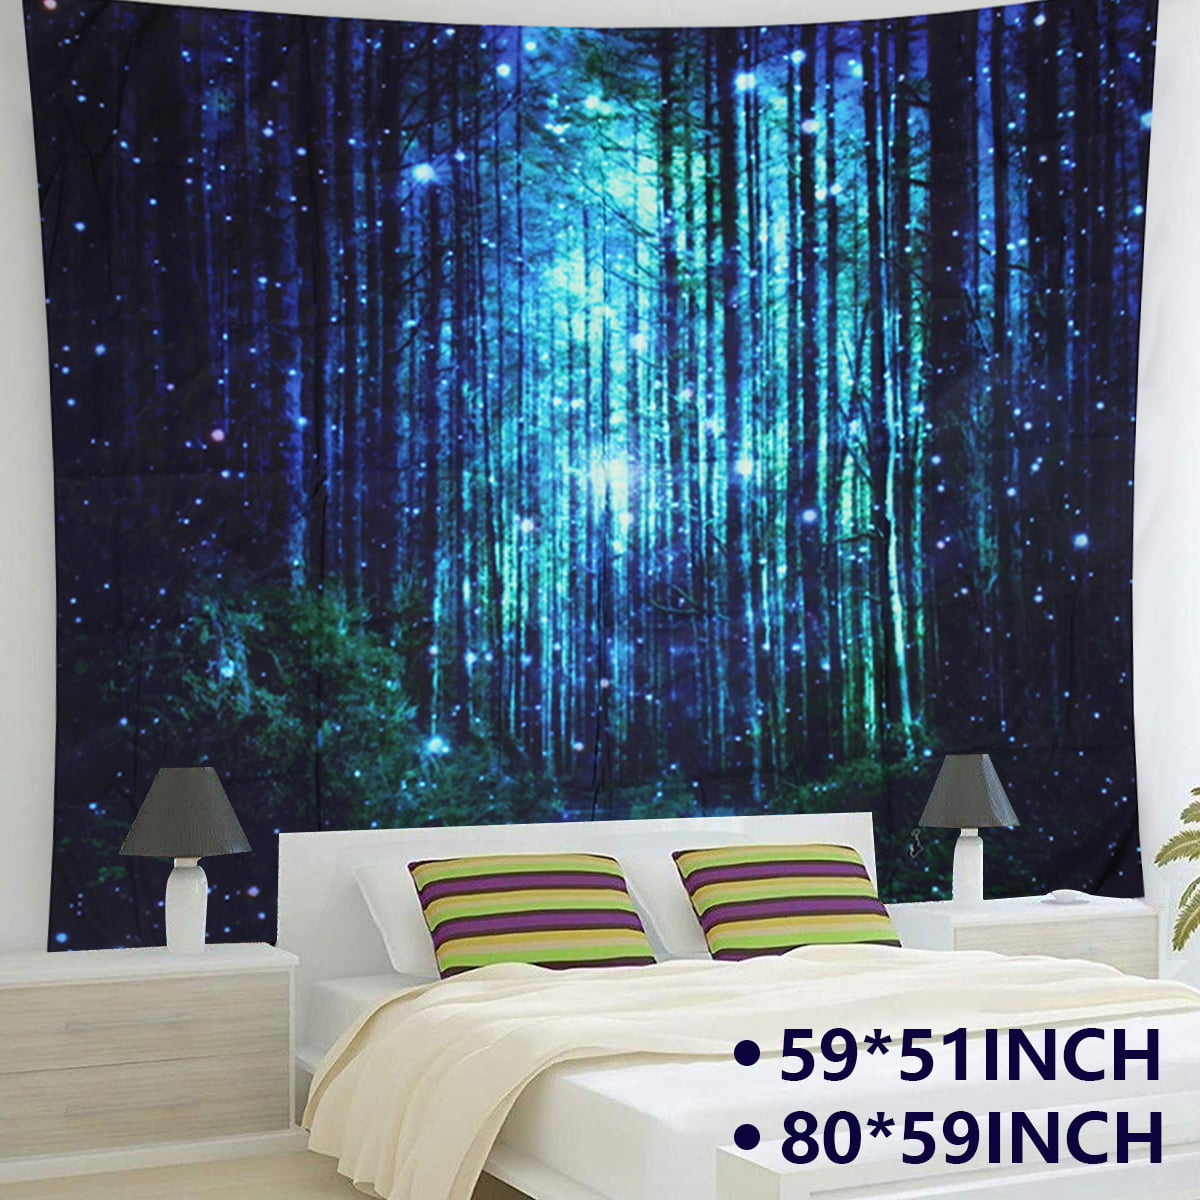 Colorful Night Sky Tapestry Art Wall Hanging Room Bedspread Tapestry Home Decor